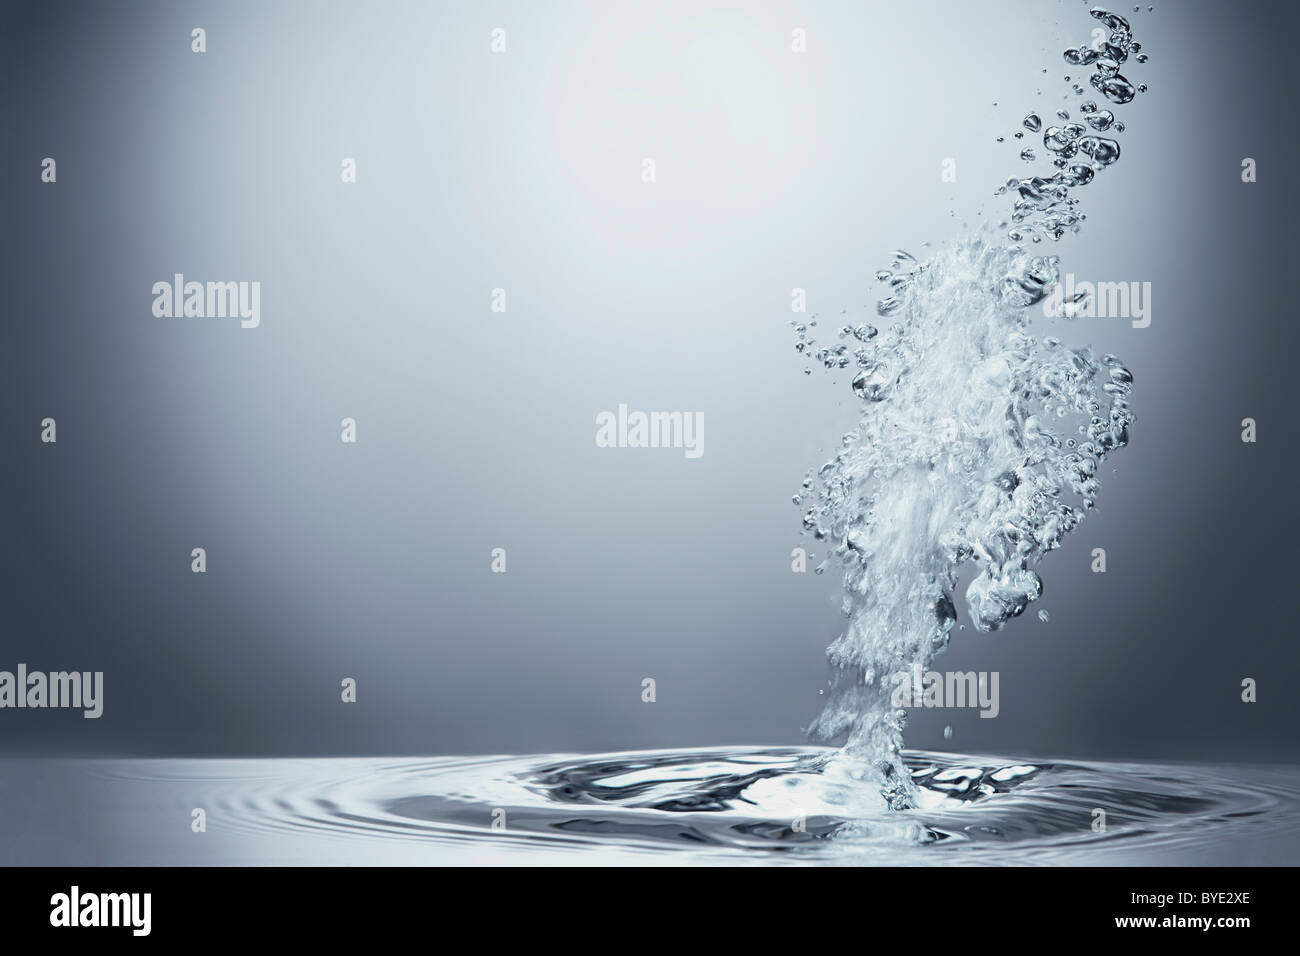 Air bubbles bubbling in water Stock Photo